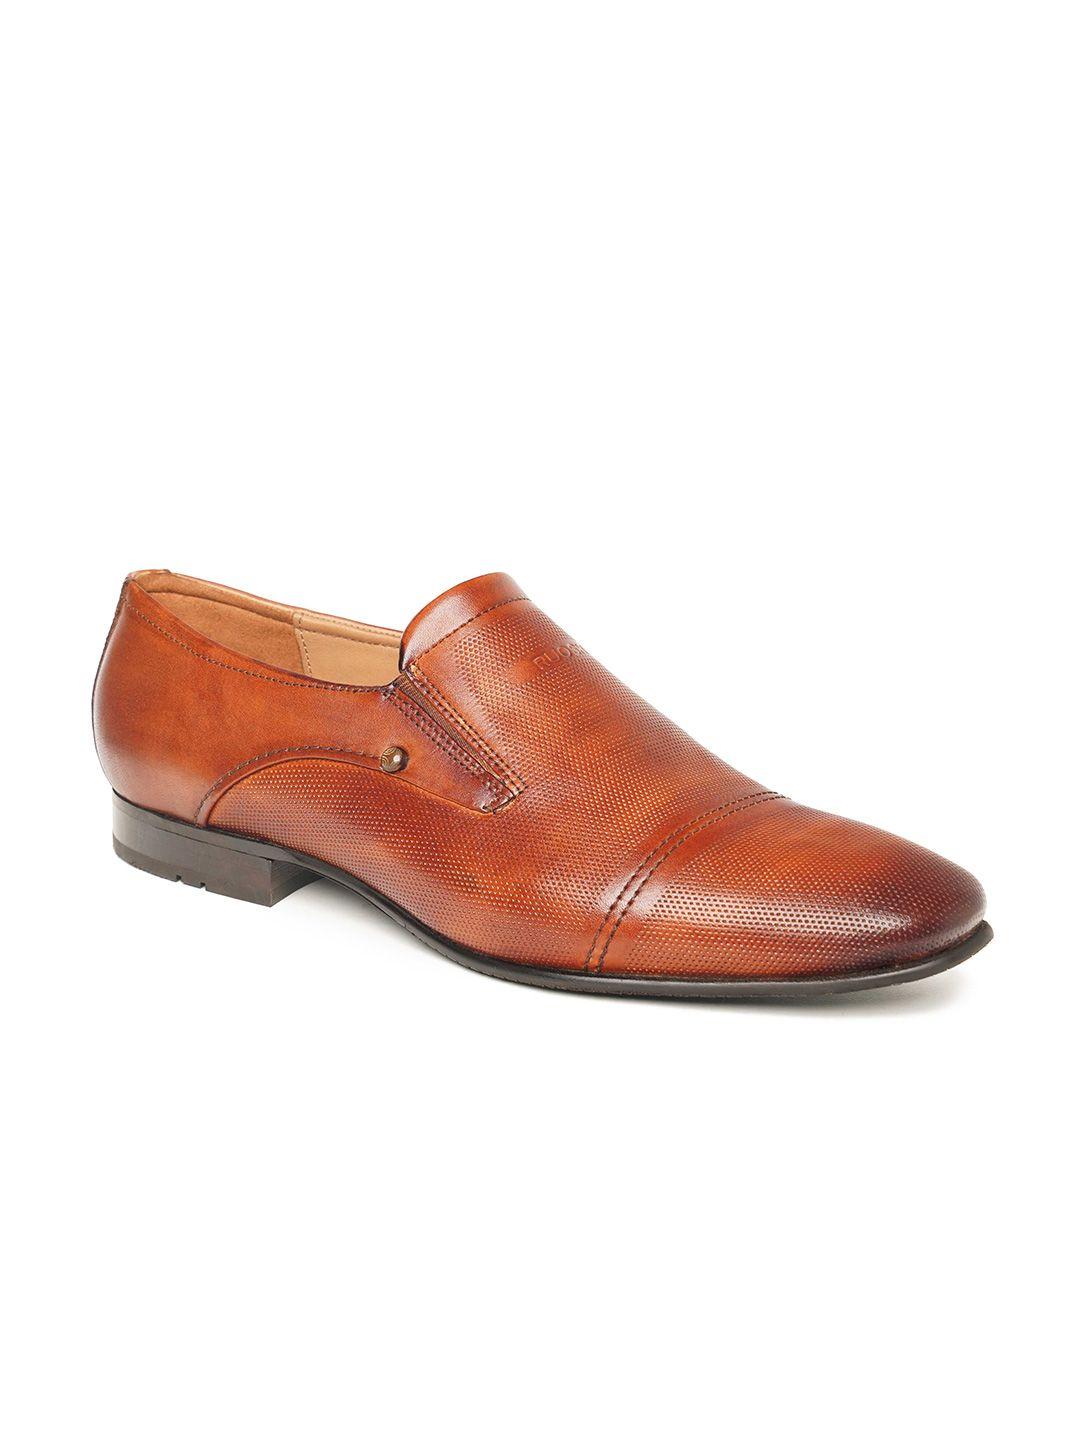 ruosh-men-textured-leather-formal-loafers